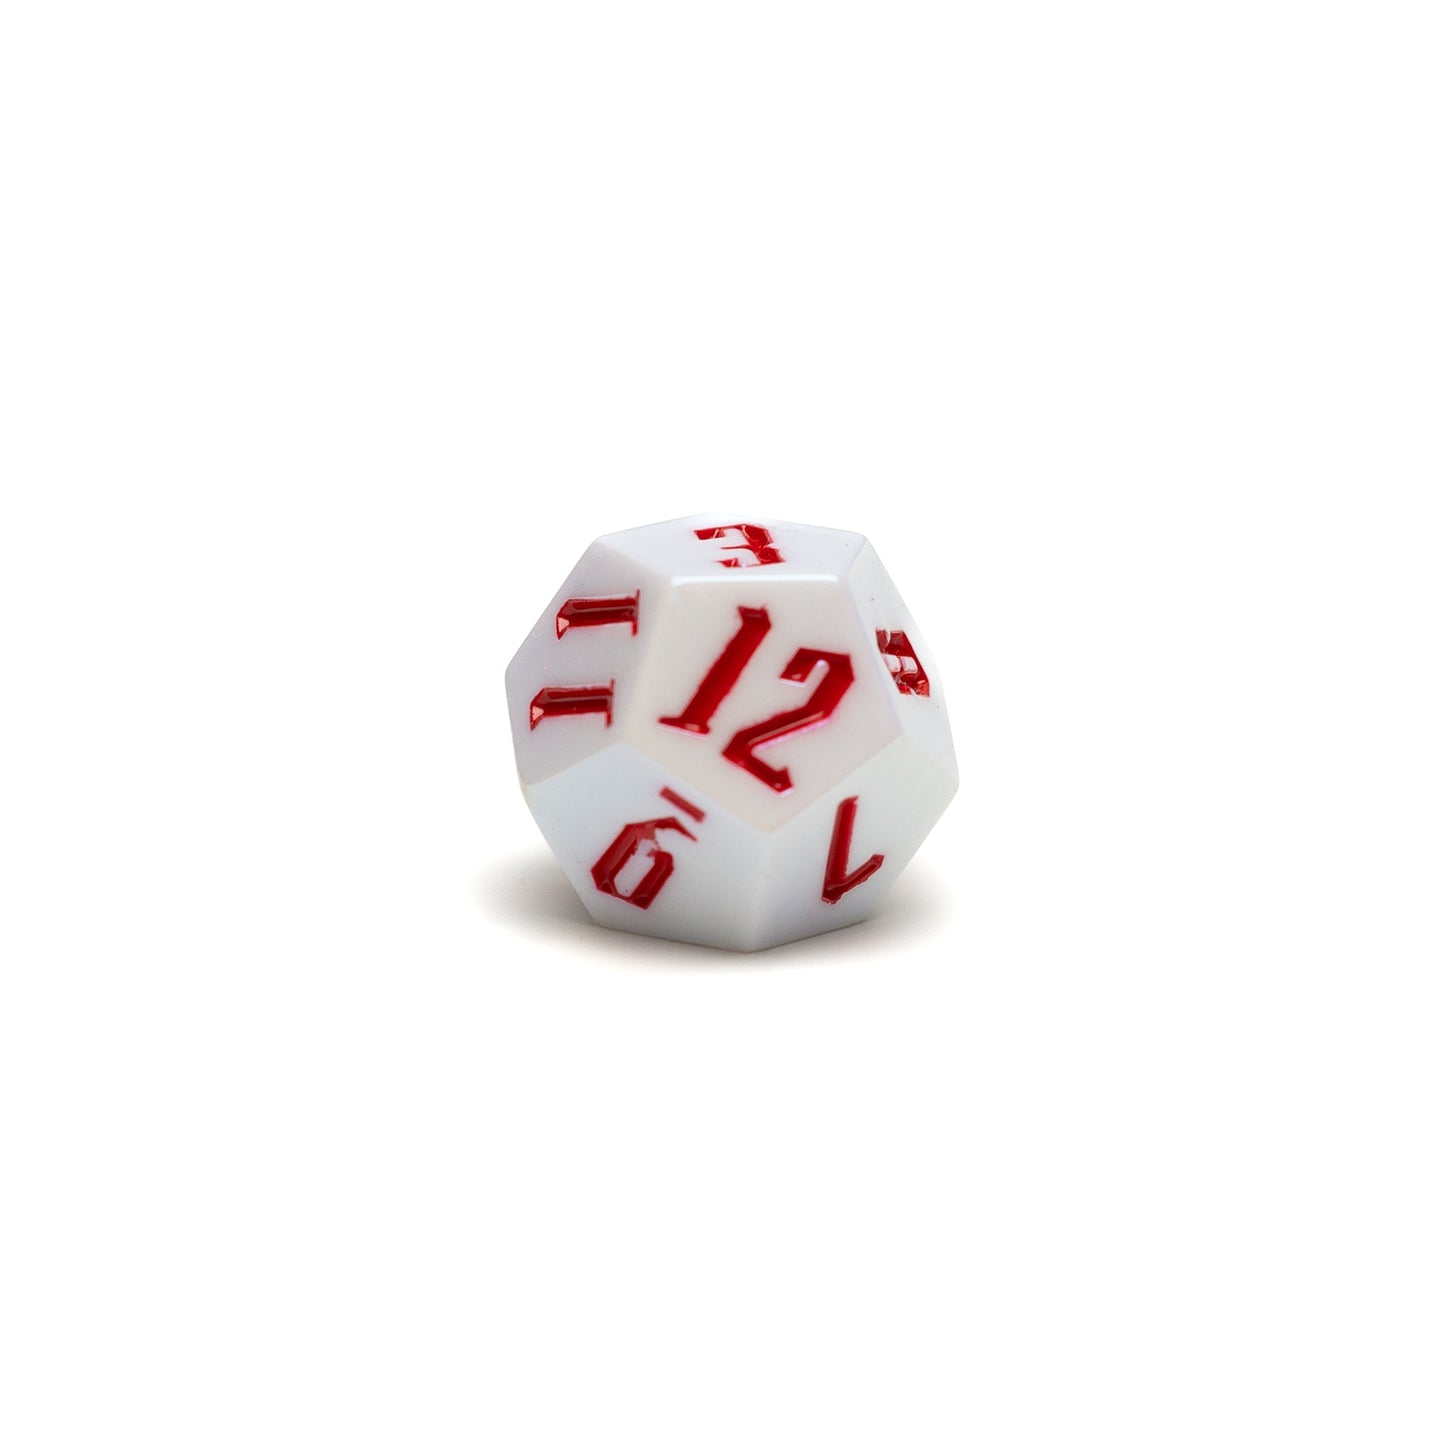 Roll Britannia Royal Guard Sharp Edged Electroplating Dungeons and Dragons D12 Dice with Red and White Aesthetic